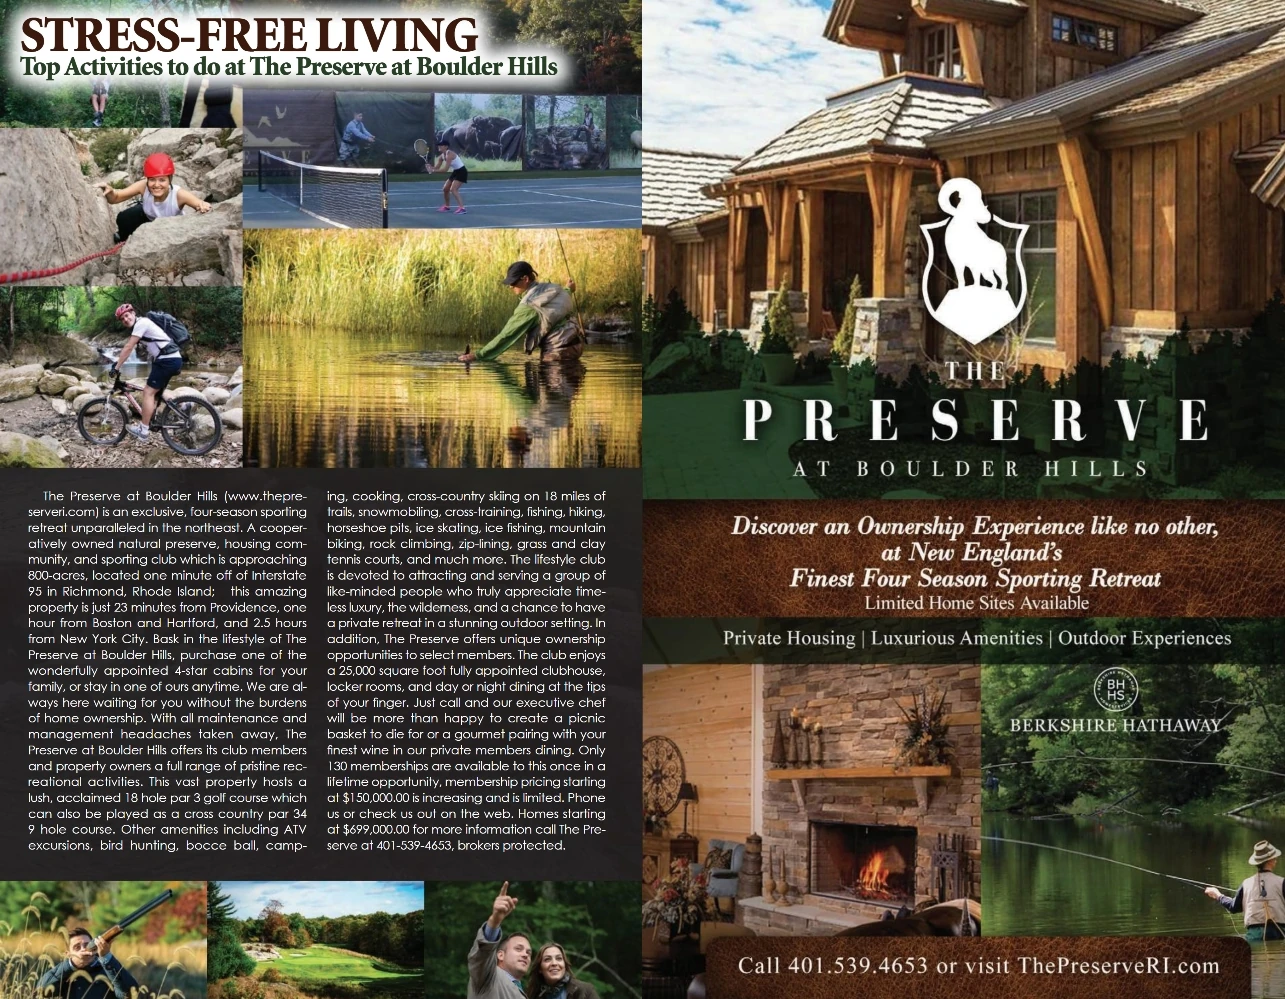 NE Home Life presents top activities to enjoy at The Preserve.